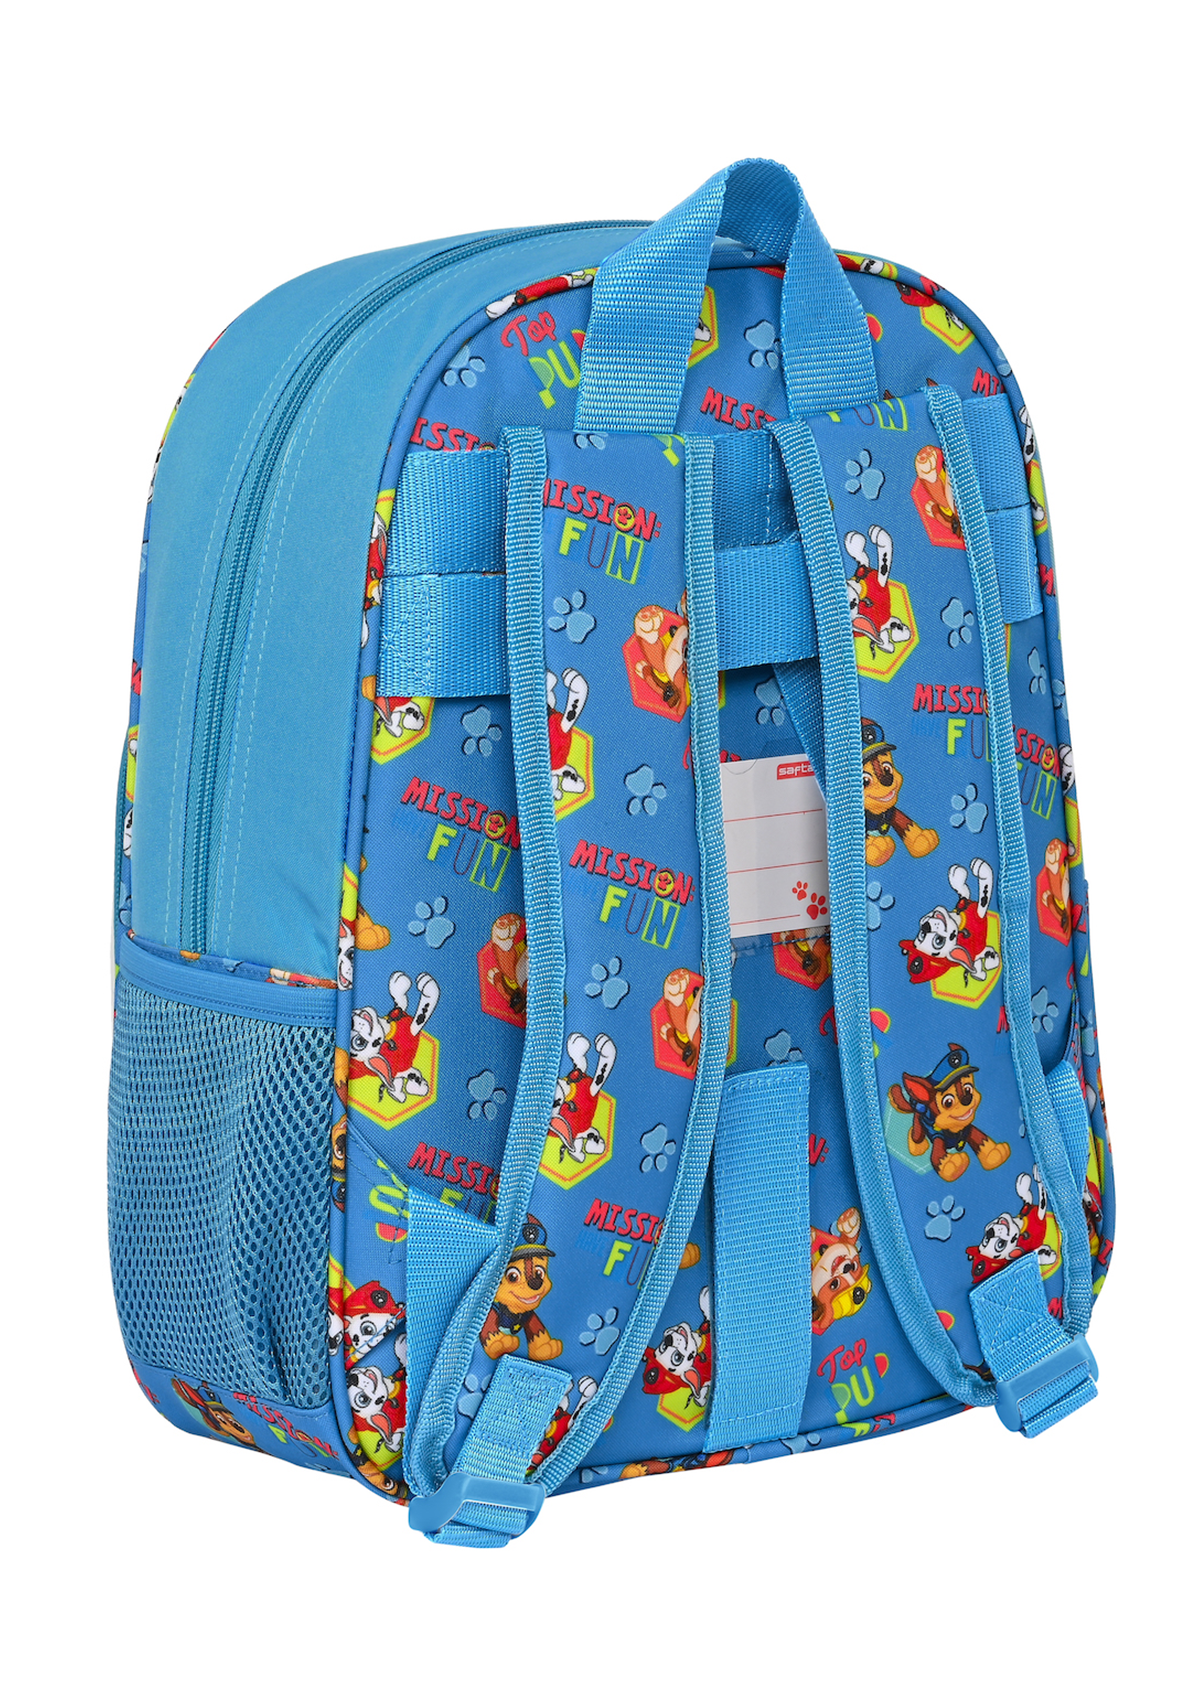 Paw Patrol Small Backpack